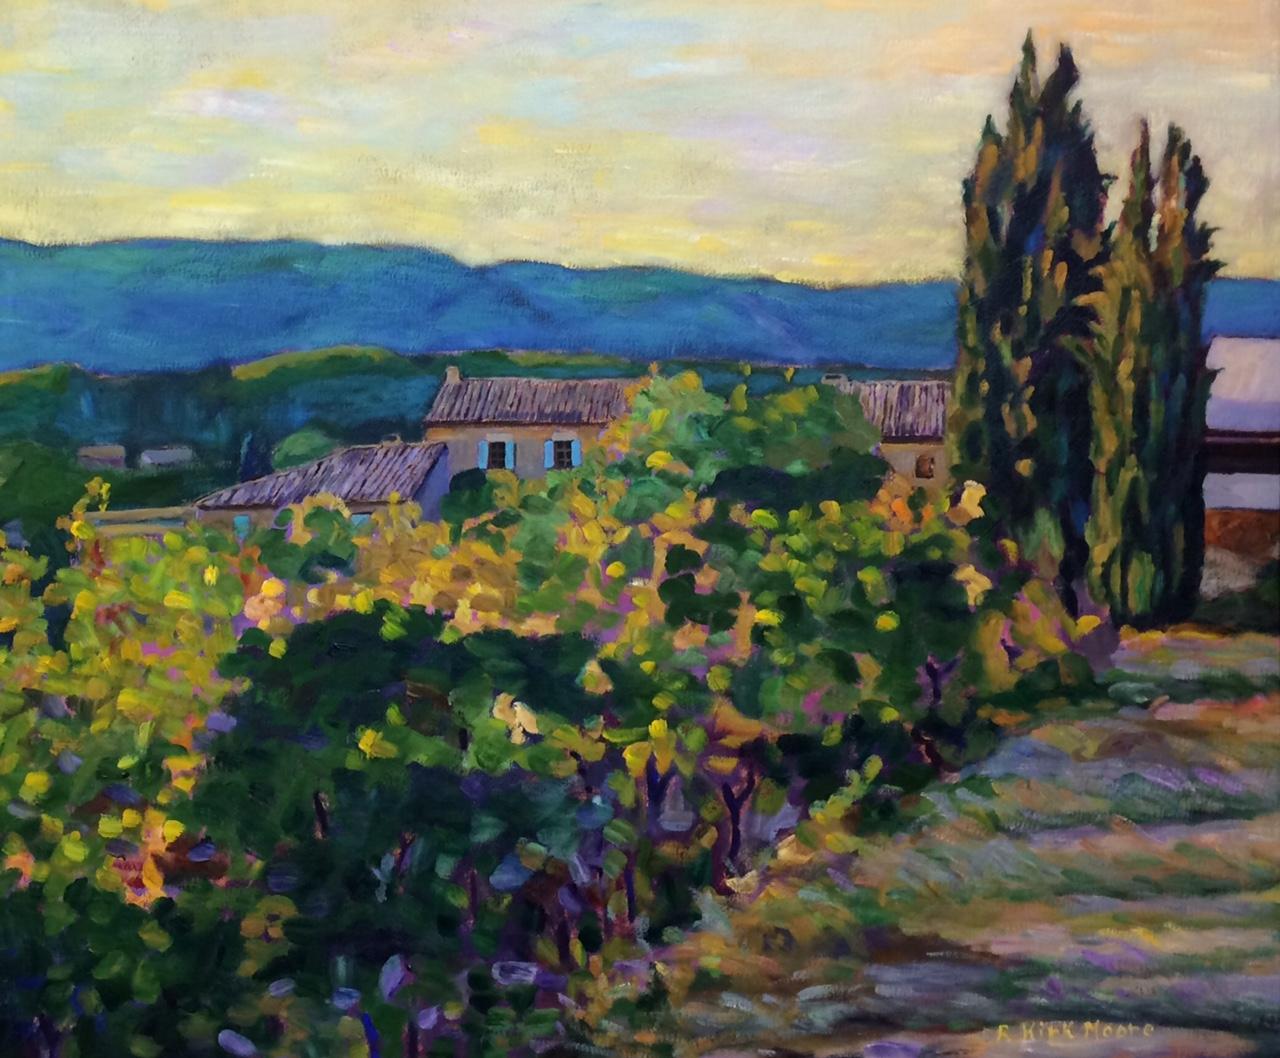 Vineyard and Farmhouse, Provence, original French impressionist landscape - Painting by R. Kirk Moore